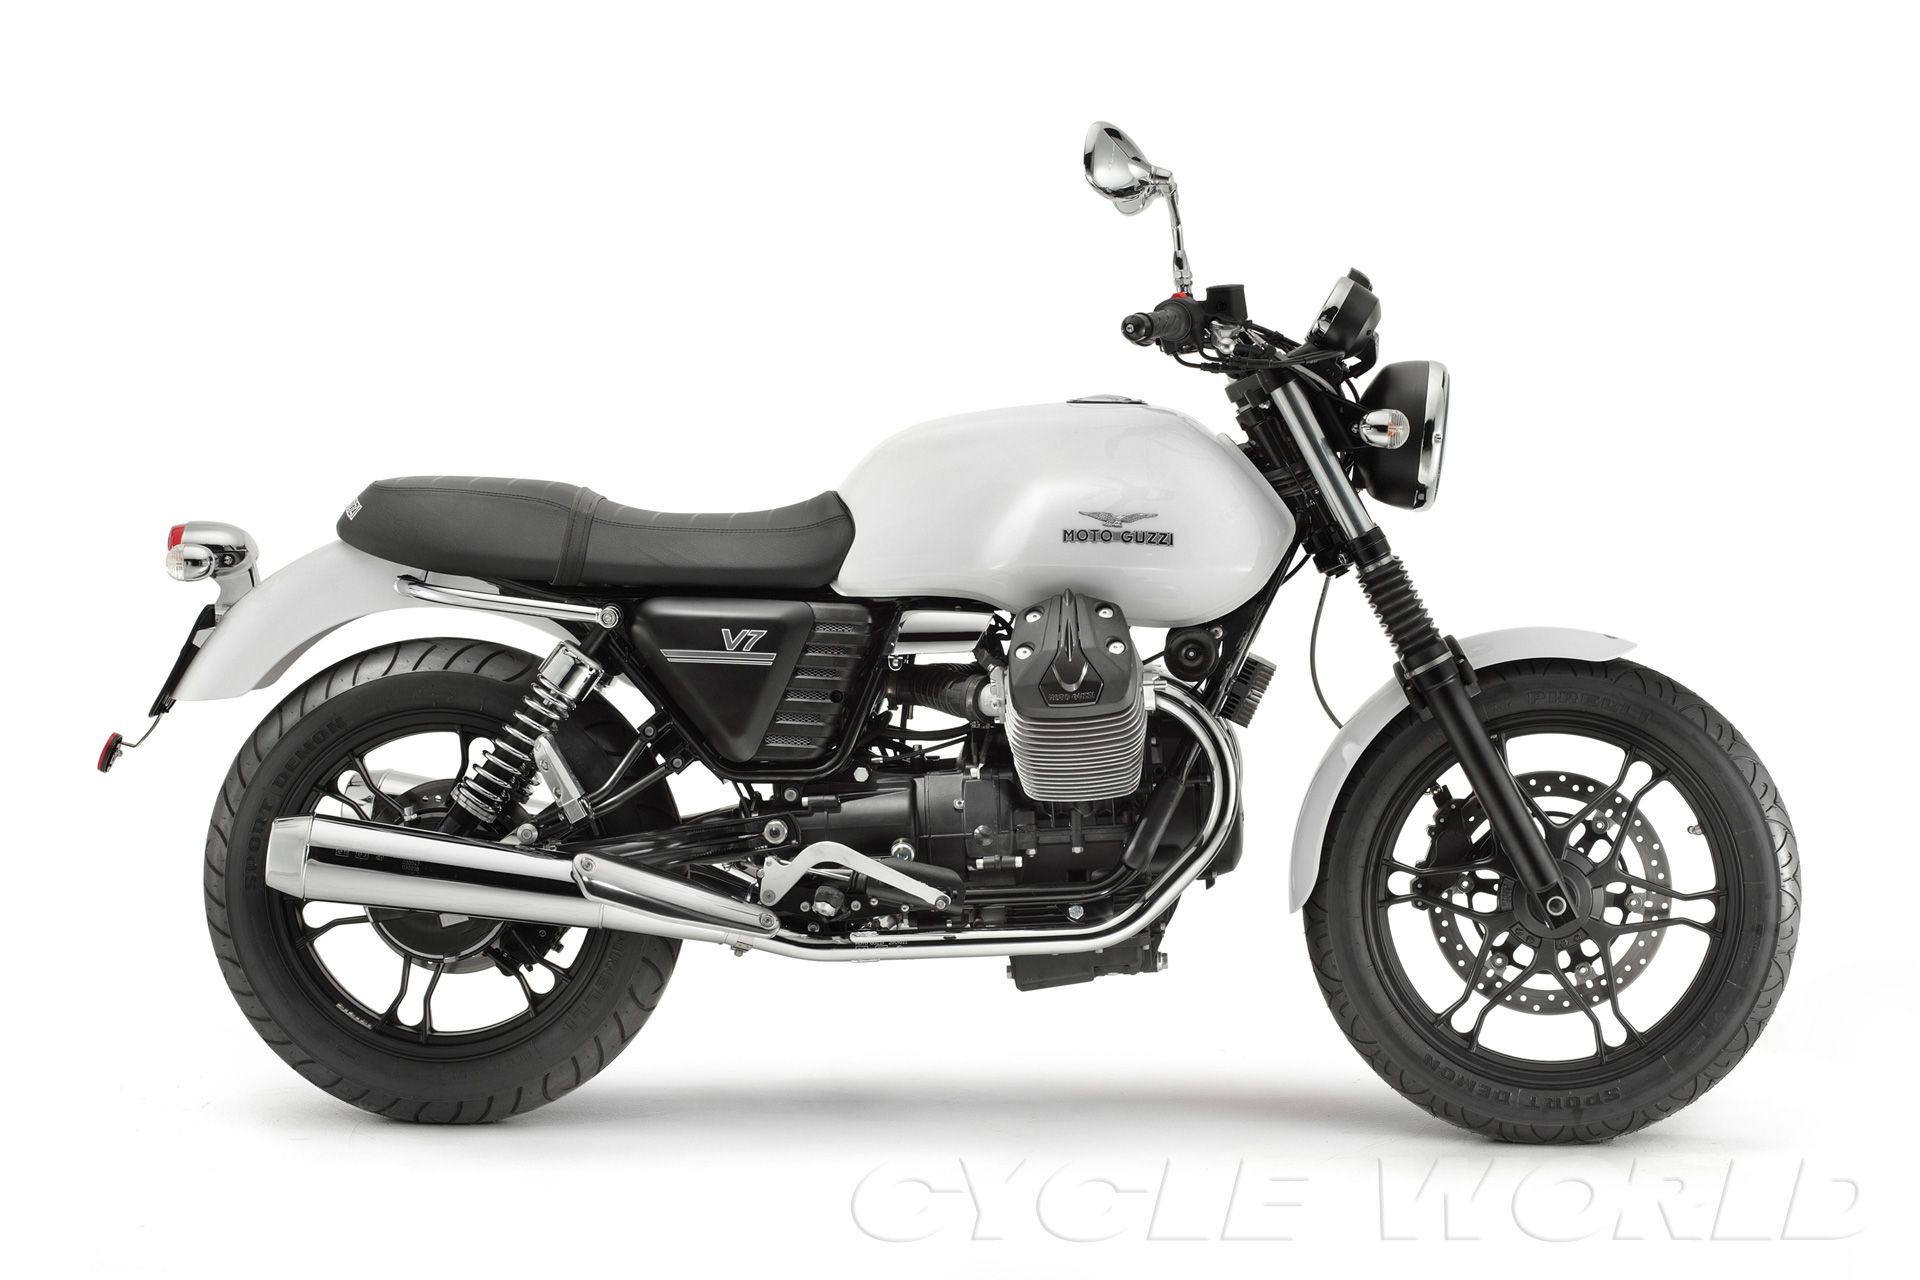 2013 Moto Guzzi V7 Lineup First Ride Review Cycle World